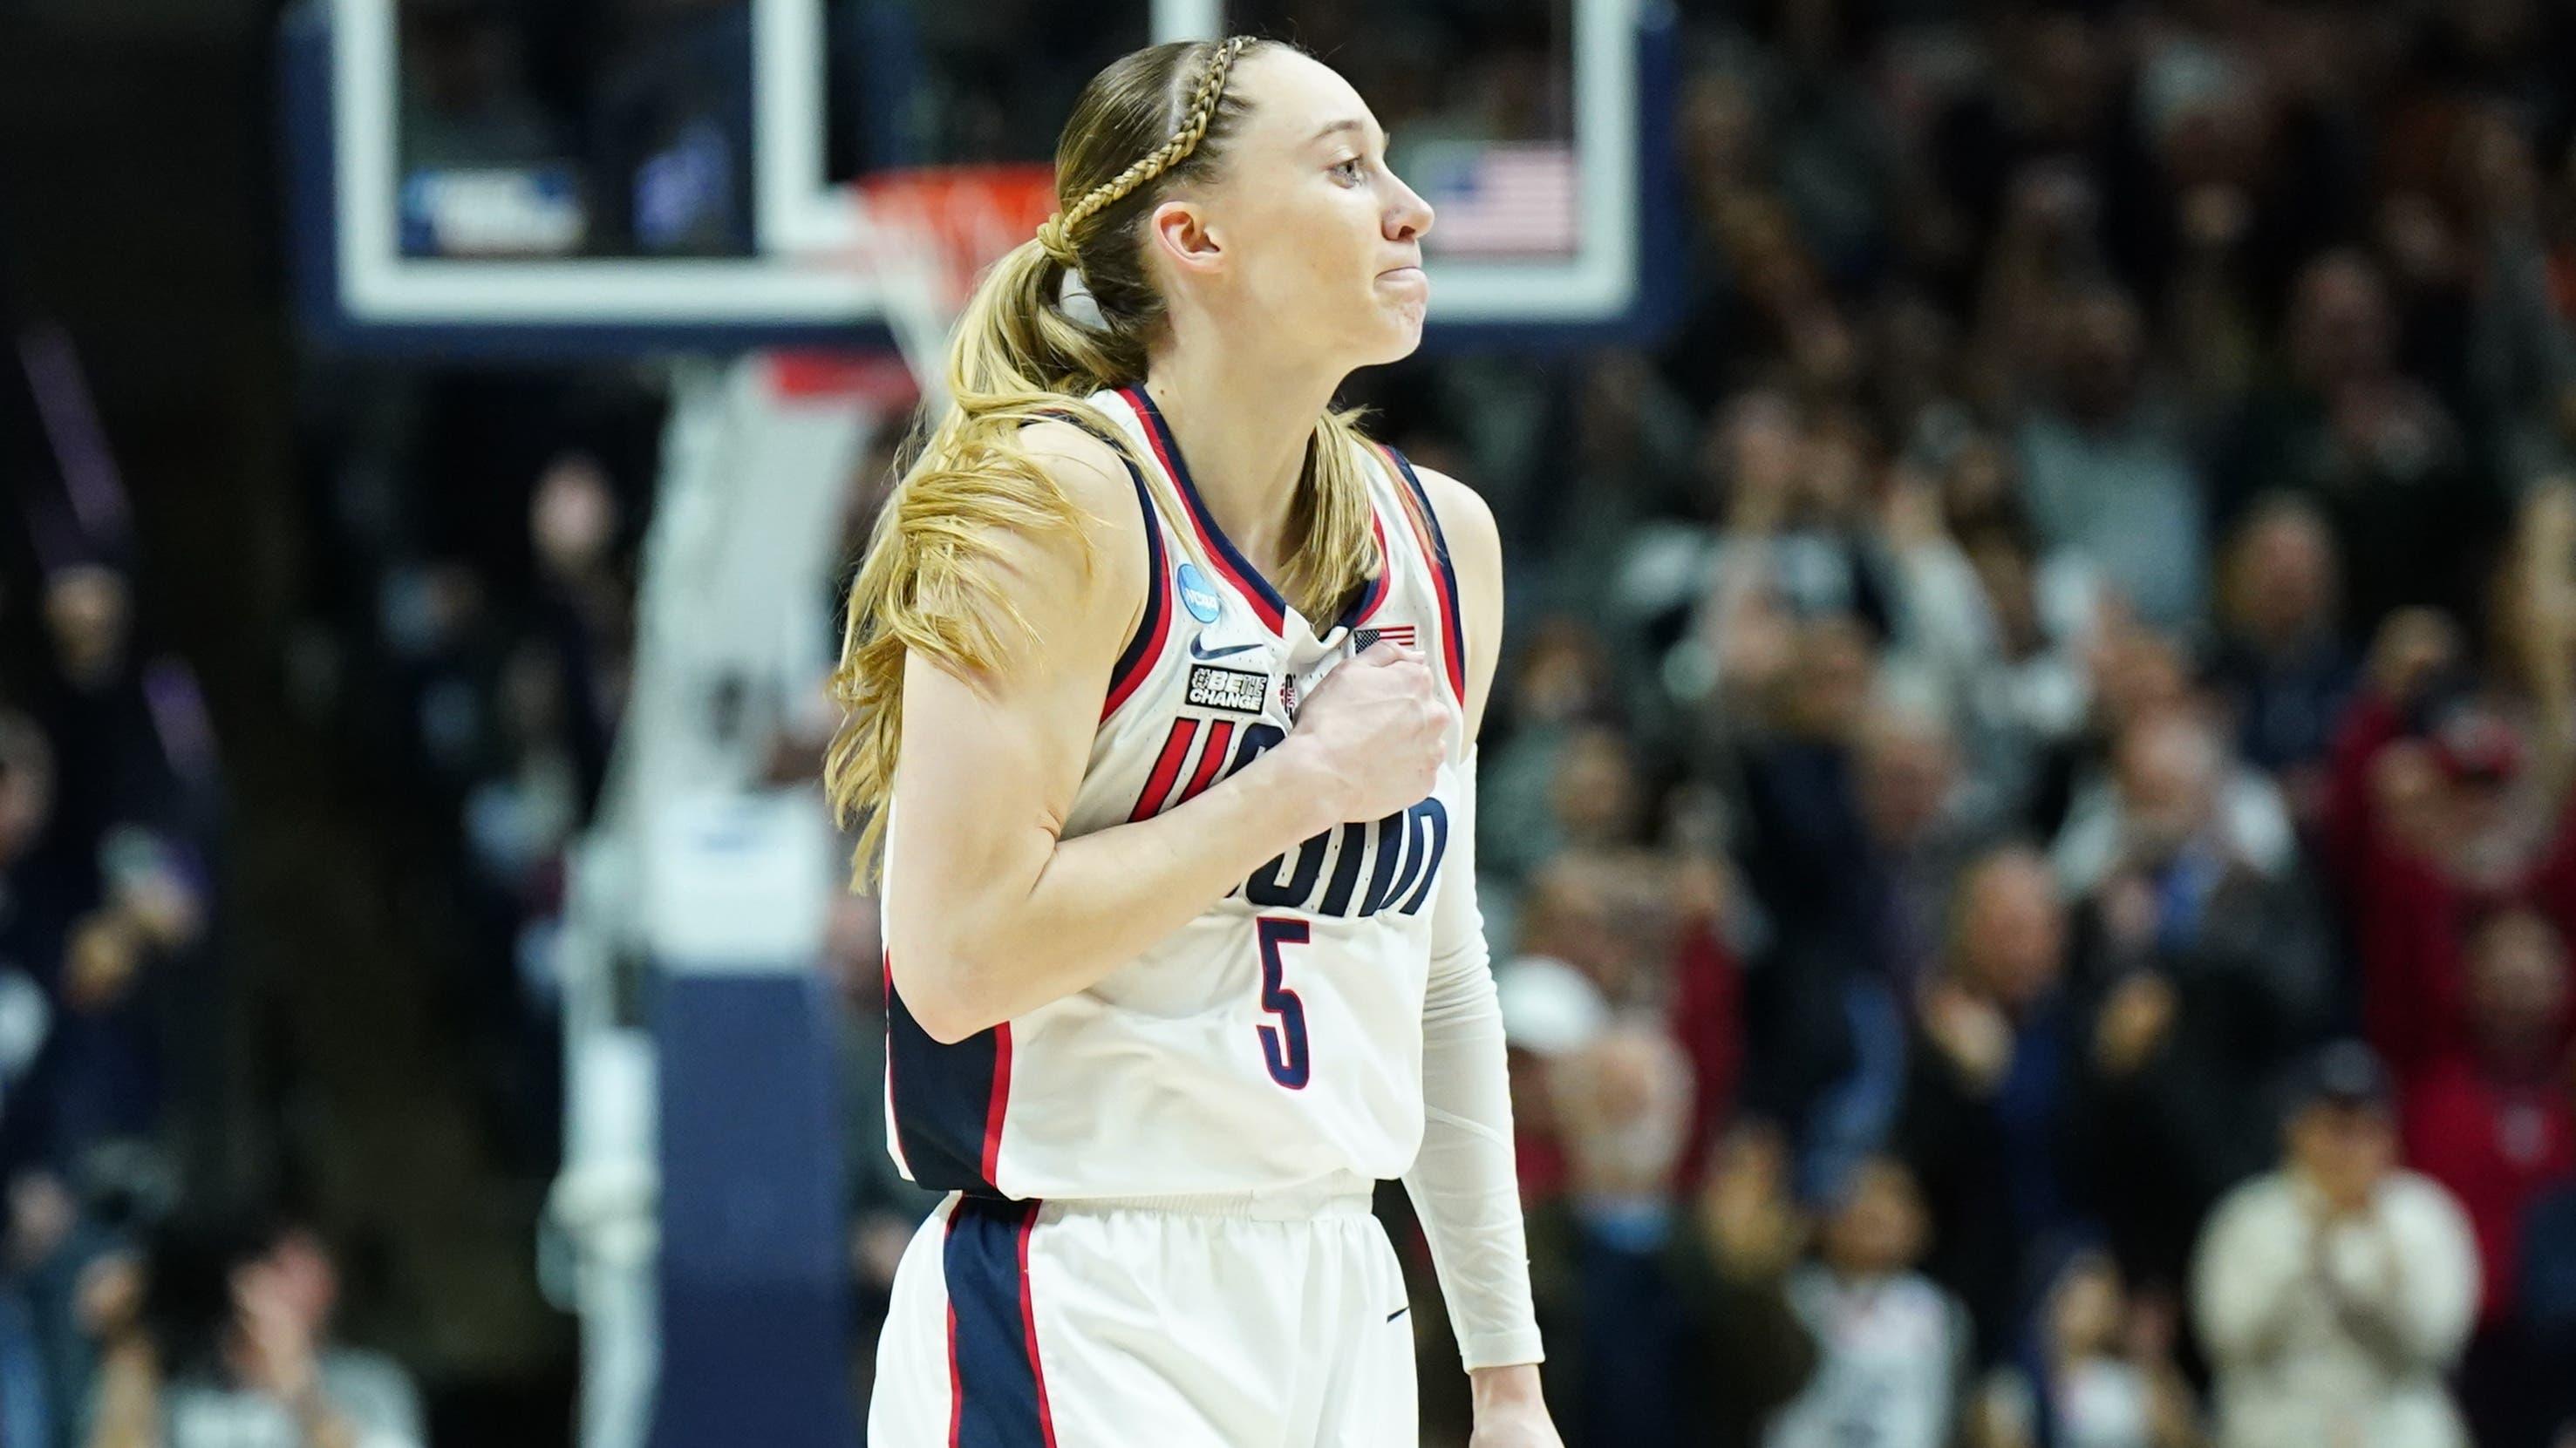 UConn's Paige Bueckers signing NIL deal to earn ownership stake in Unrivaled basketball league: report